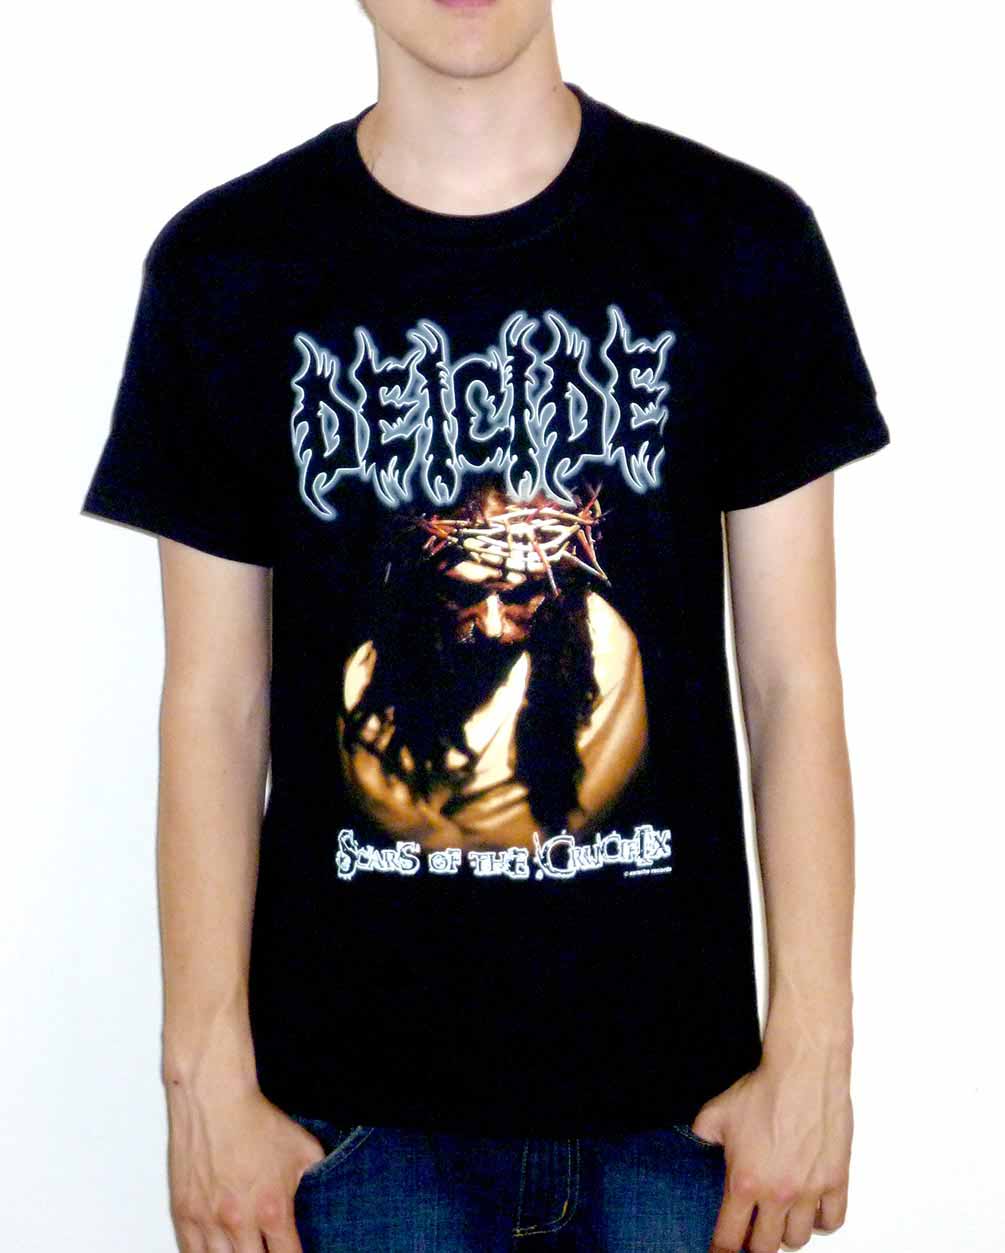 Deicide "Scars of The Crucifix" Black T-shirt